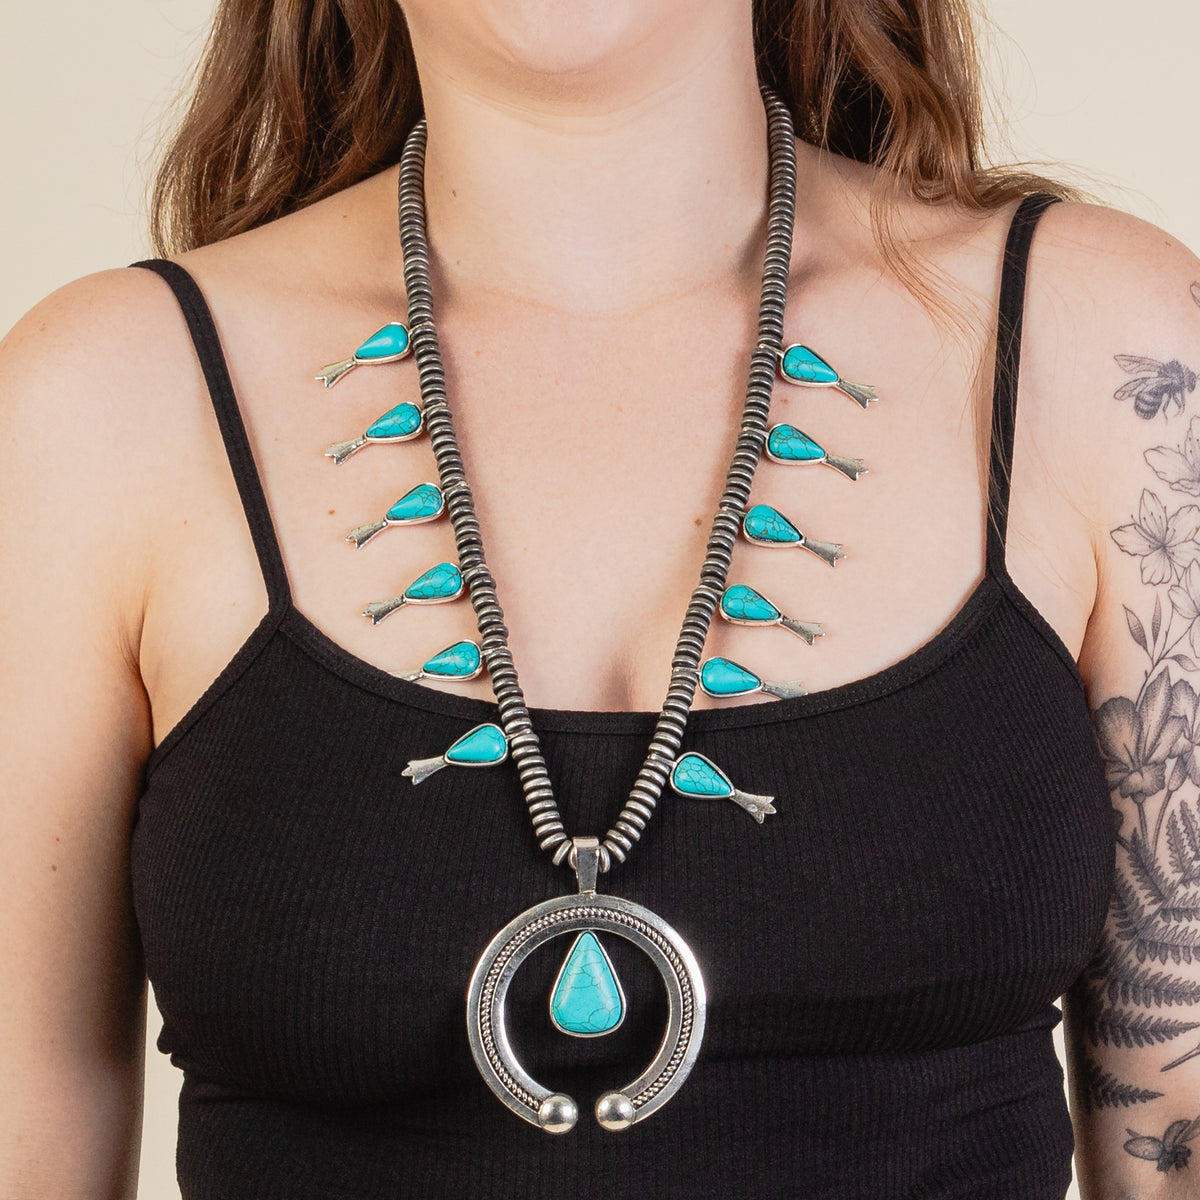 92003 - Squash Blossom Necklace - Turquoise & Silver